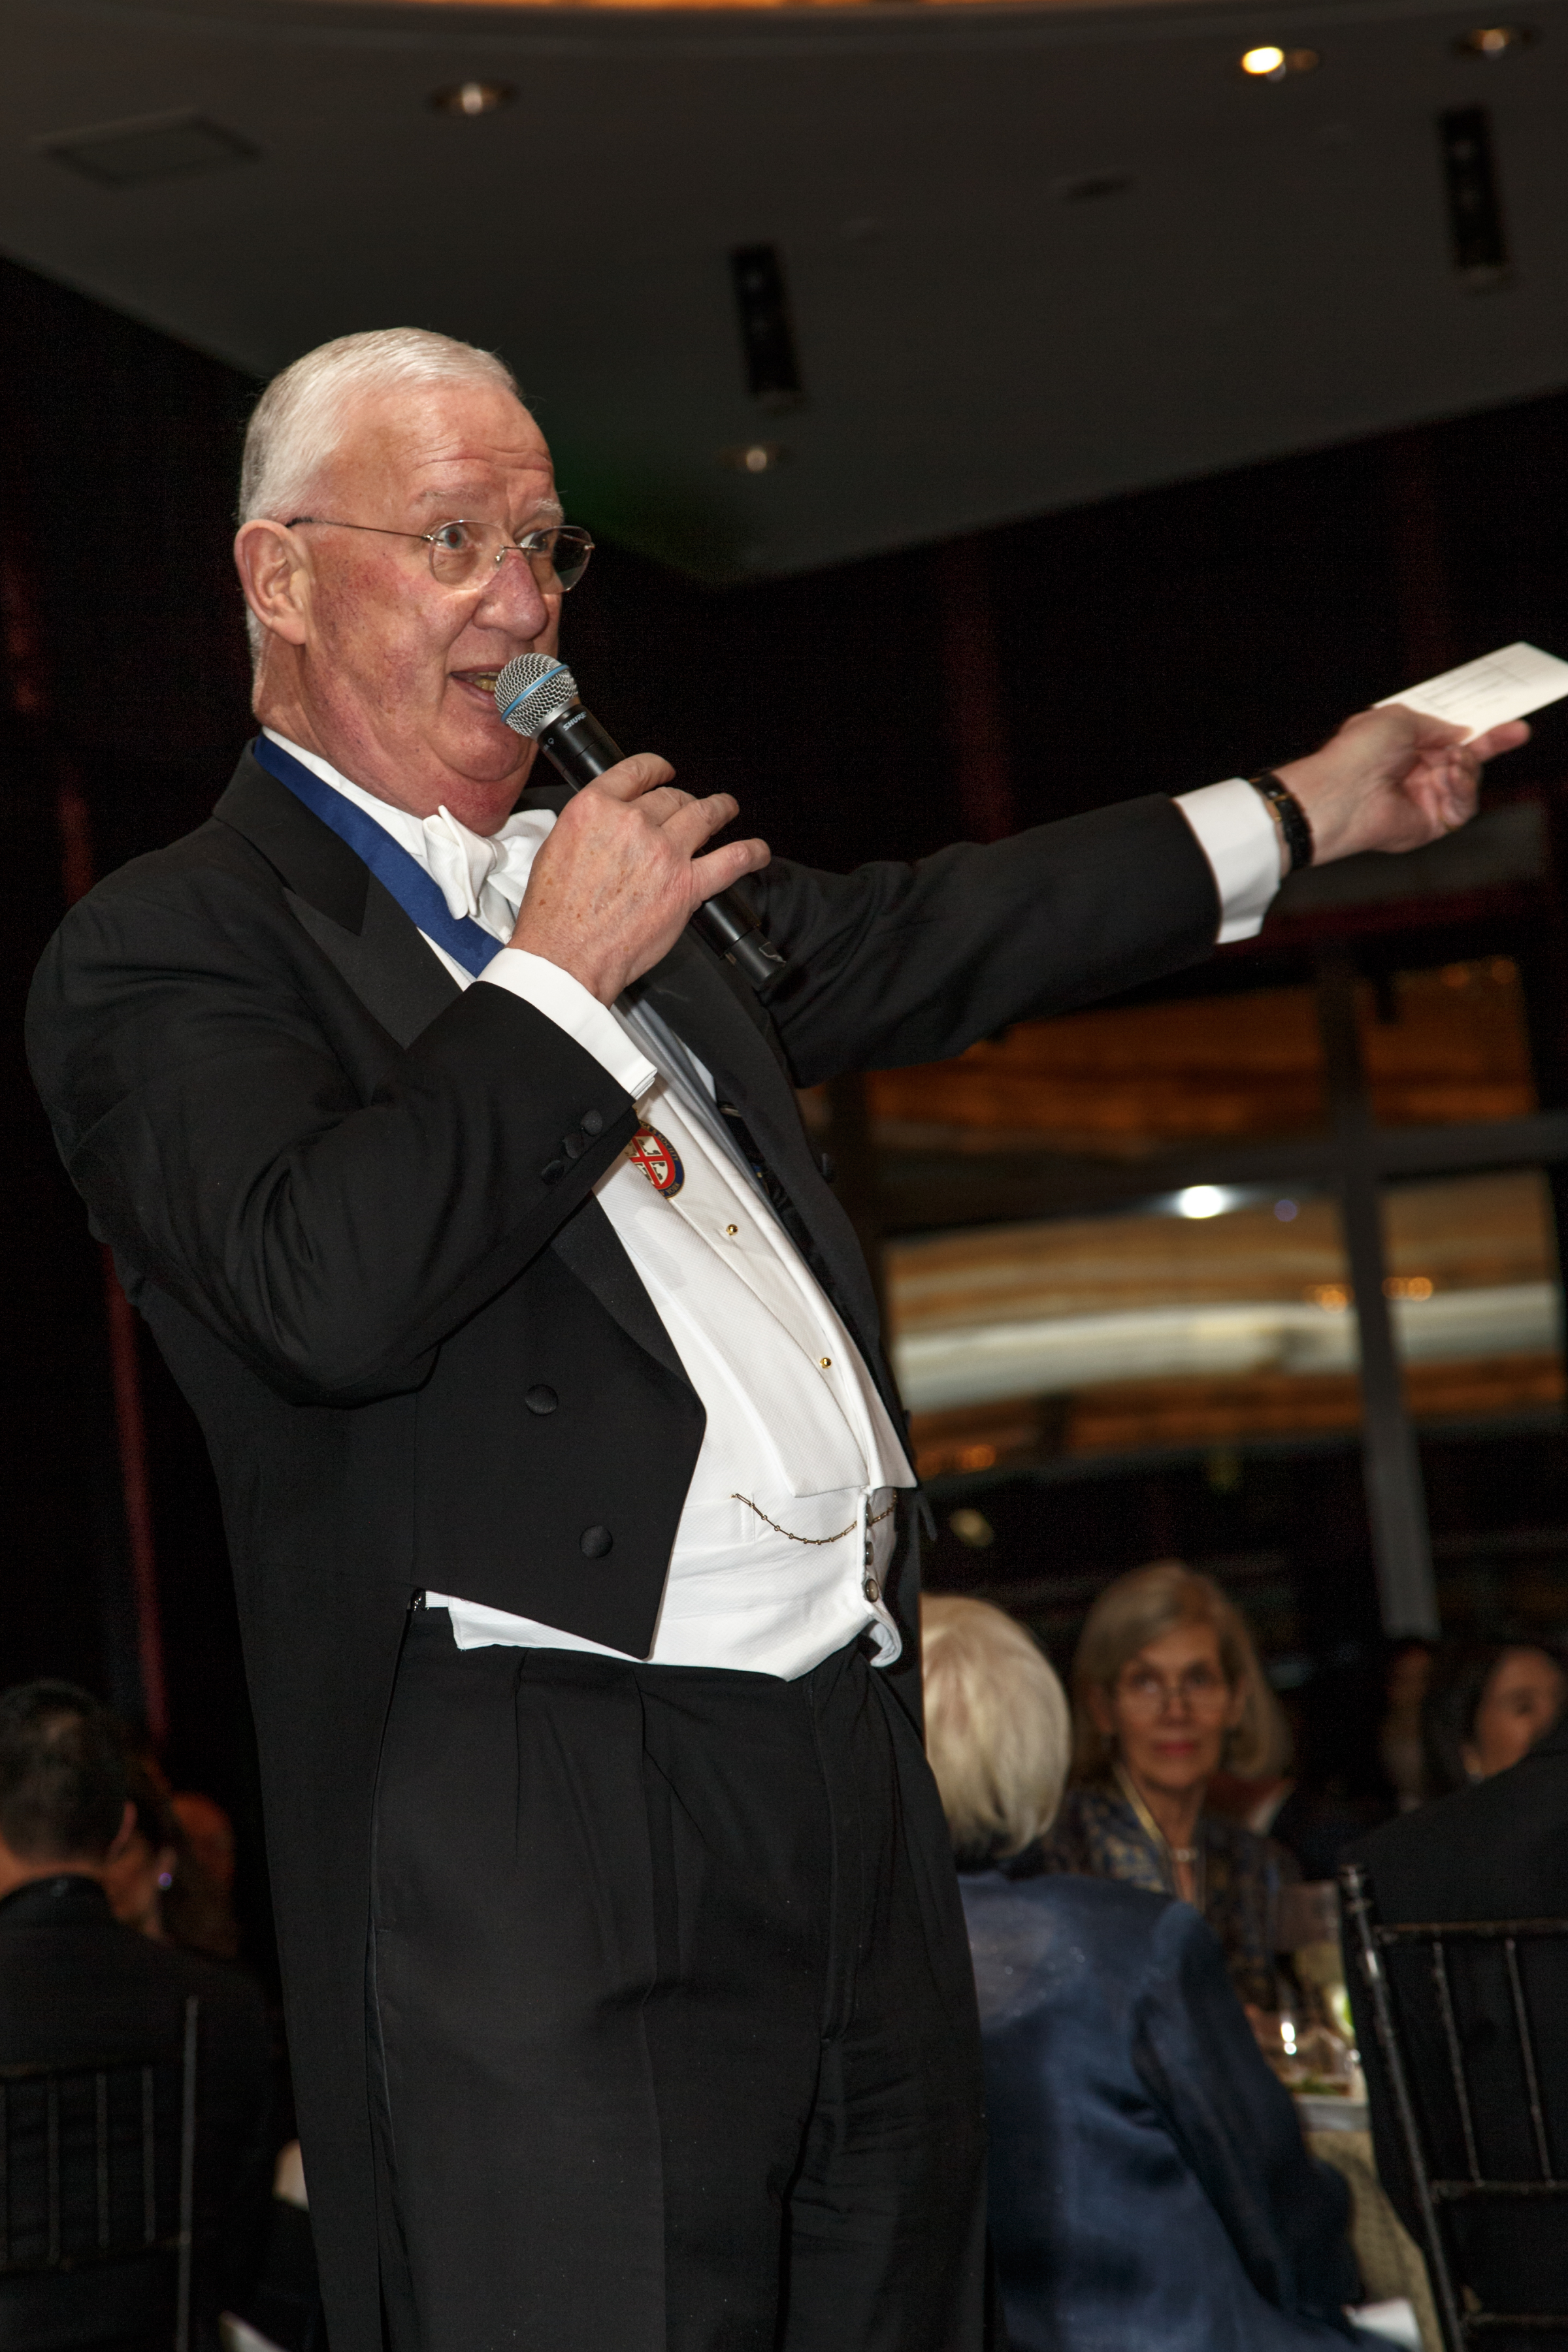  C. Hugh Hildesley leads the "Fund-A-Scholar" auction 